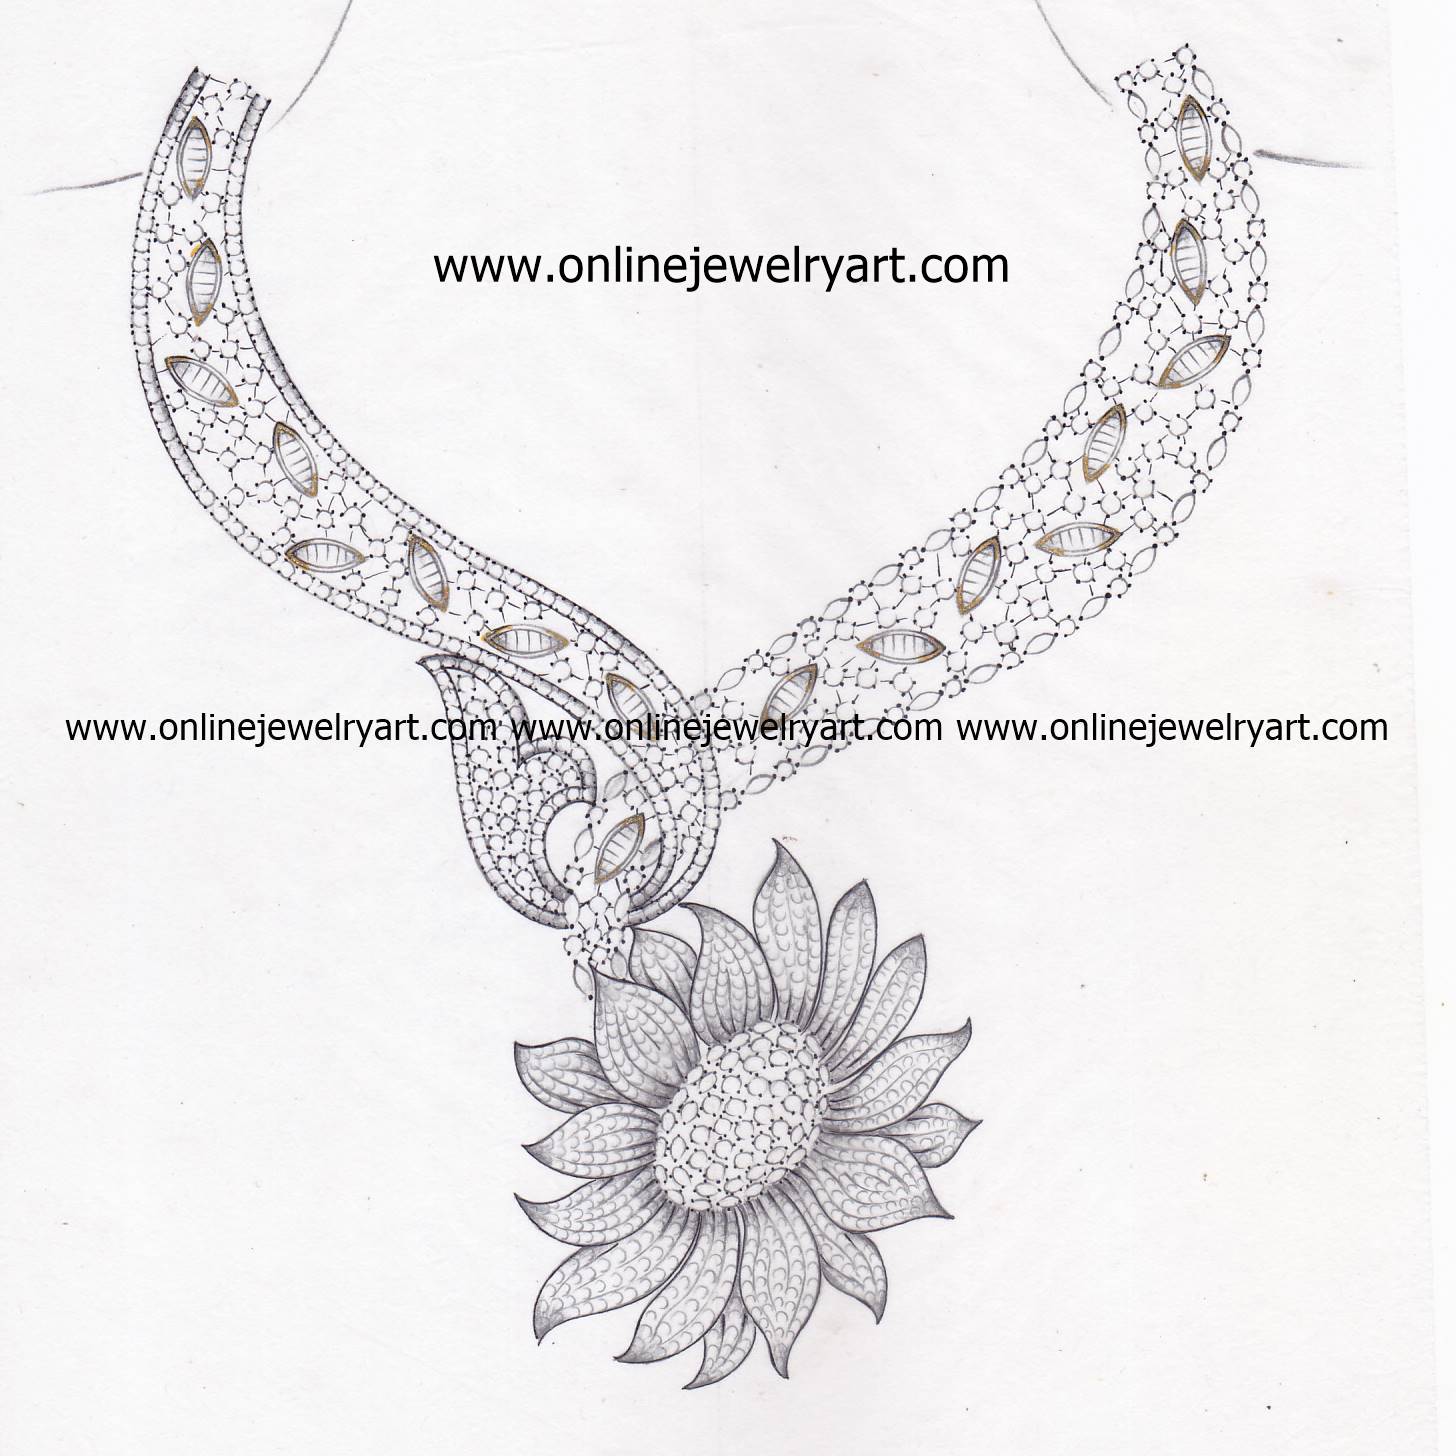 Do jewelry design sketch ring, earrings, bracelet, necklace by Katy_chili |  Fiverr